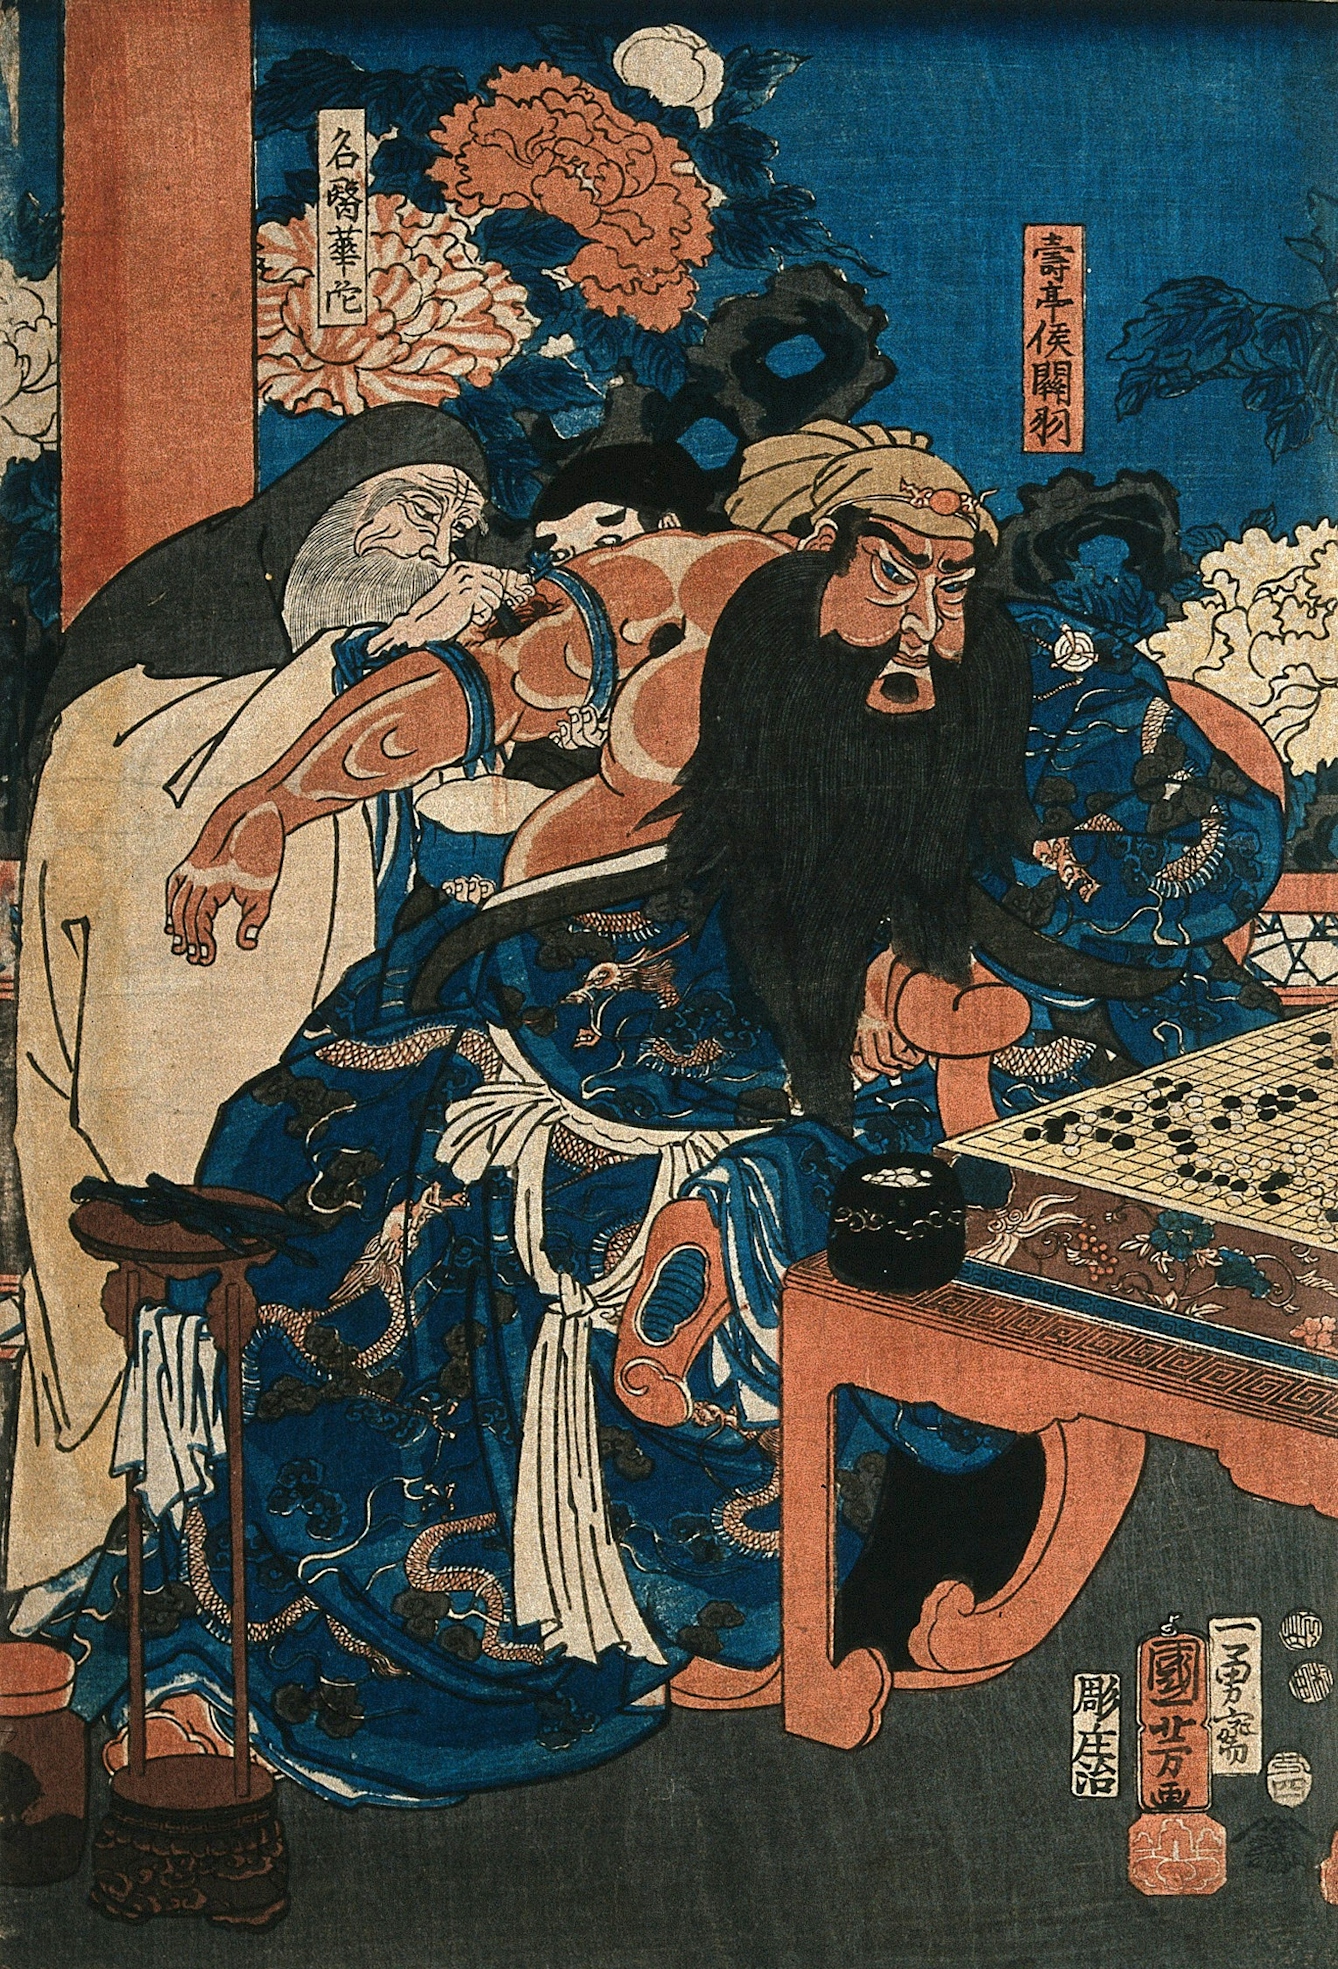 Colour print showing a bearded man (Guan Yu) playing go whilst a surgeon cuts between two tourniquets on his upper arm.